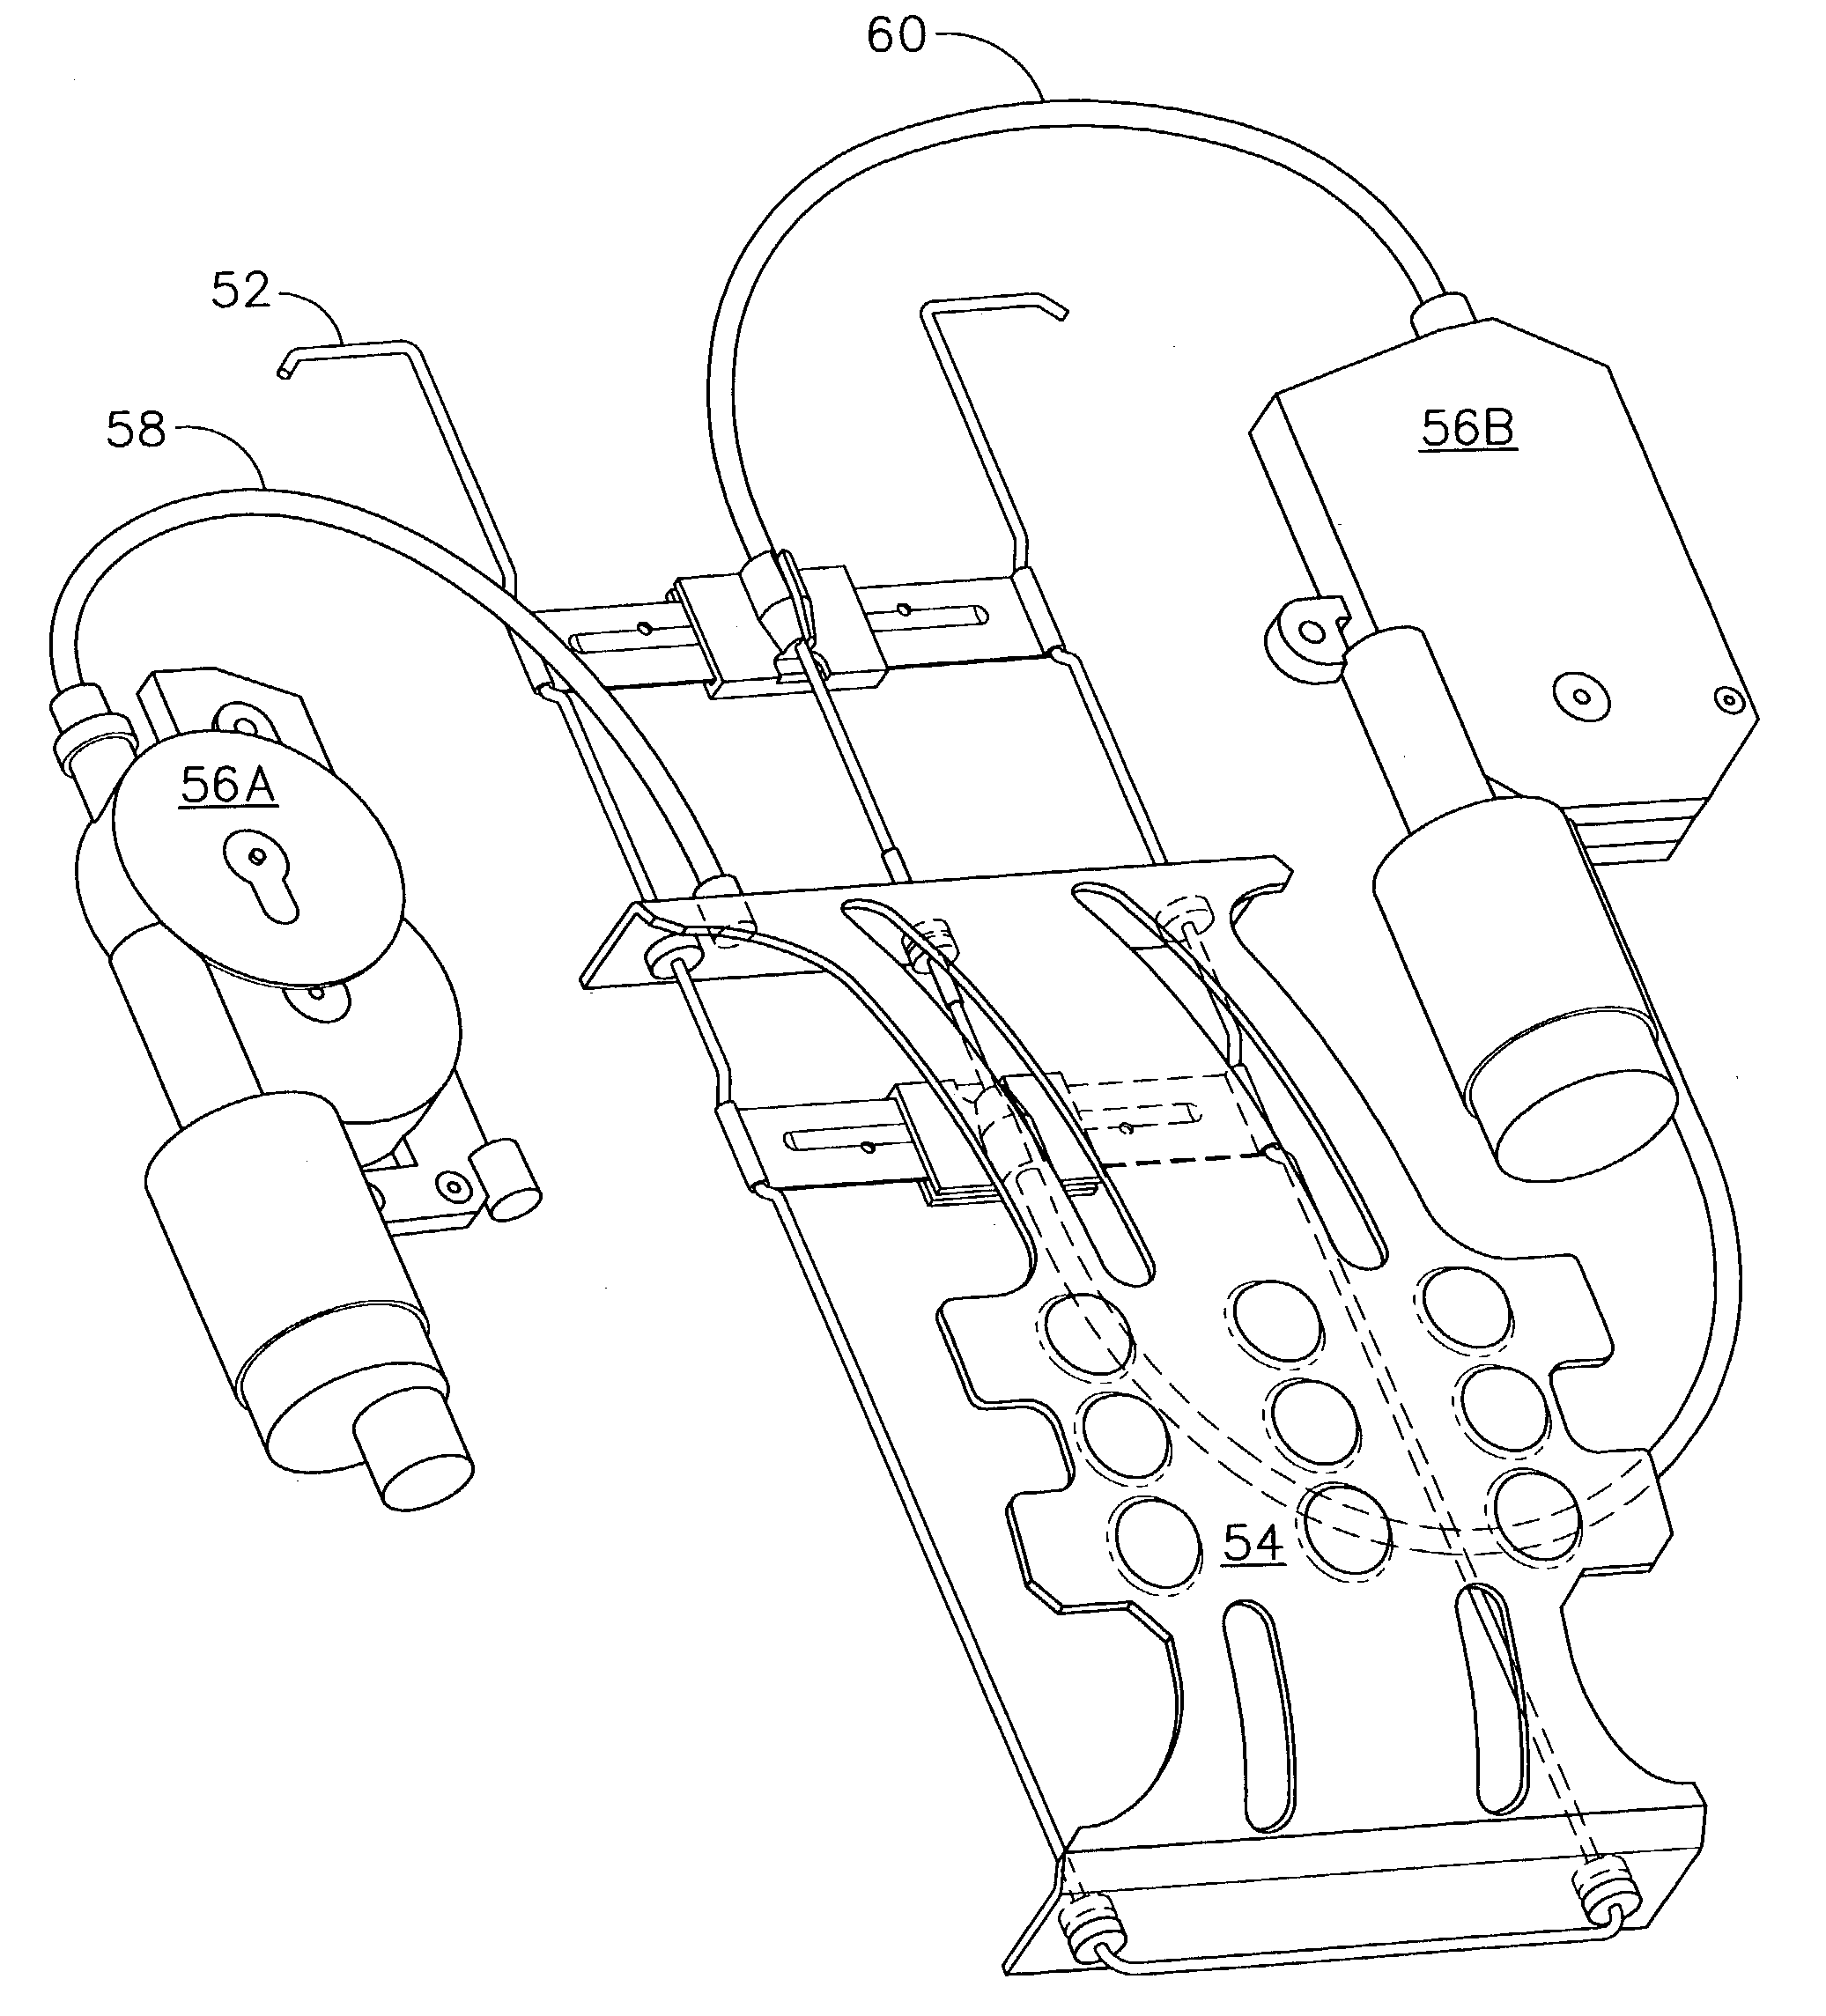 Massage apparatus and method for lumbar support